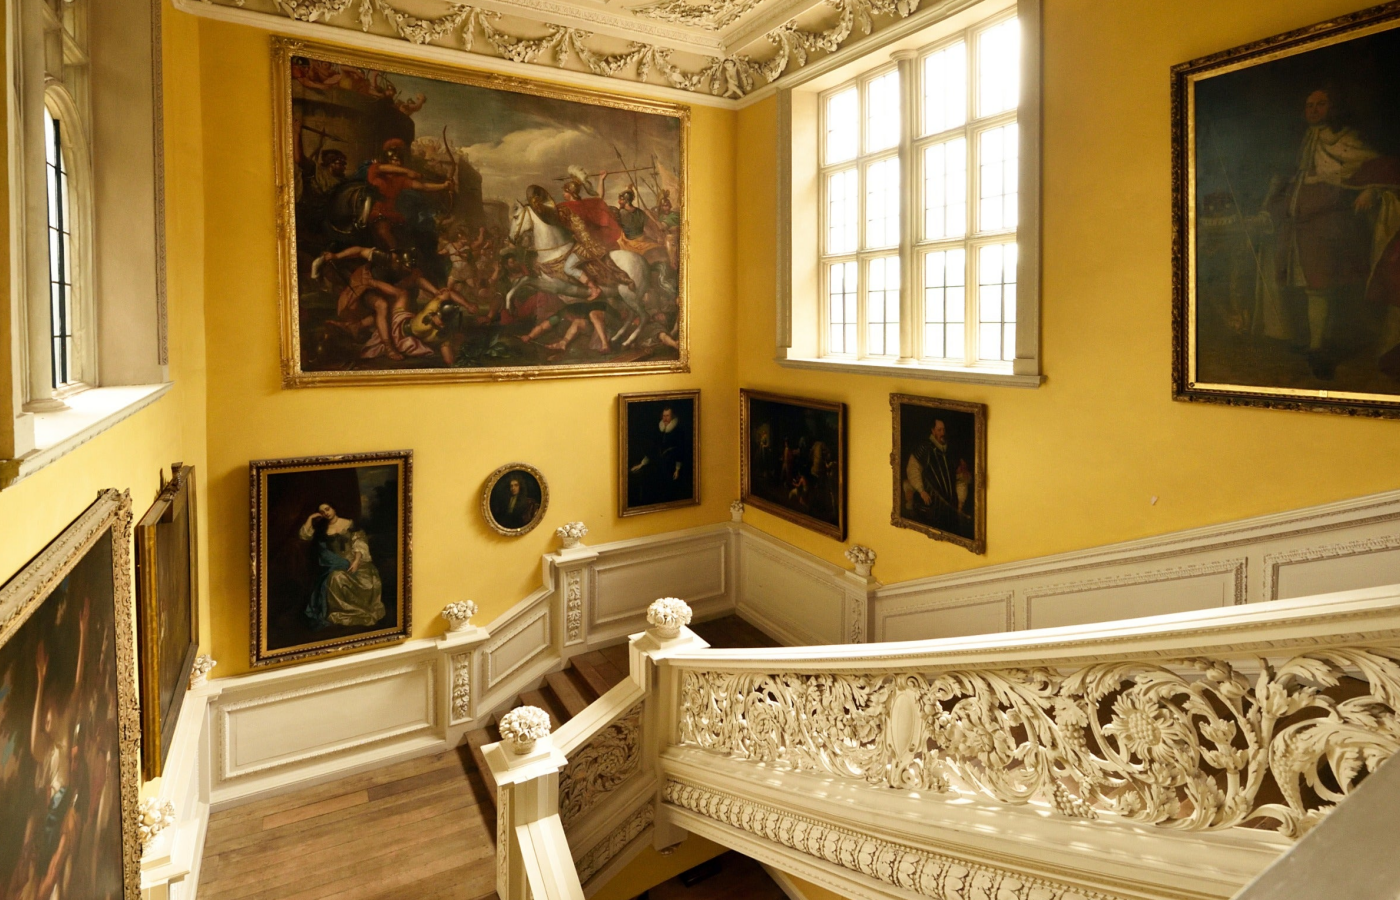 The grandeur of the Exquisite Staircase Gallery